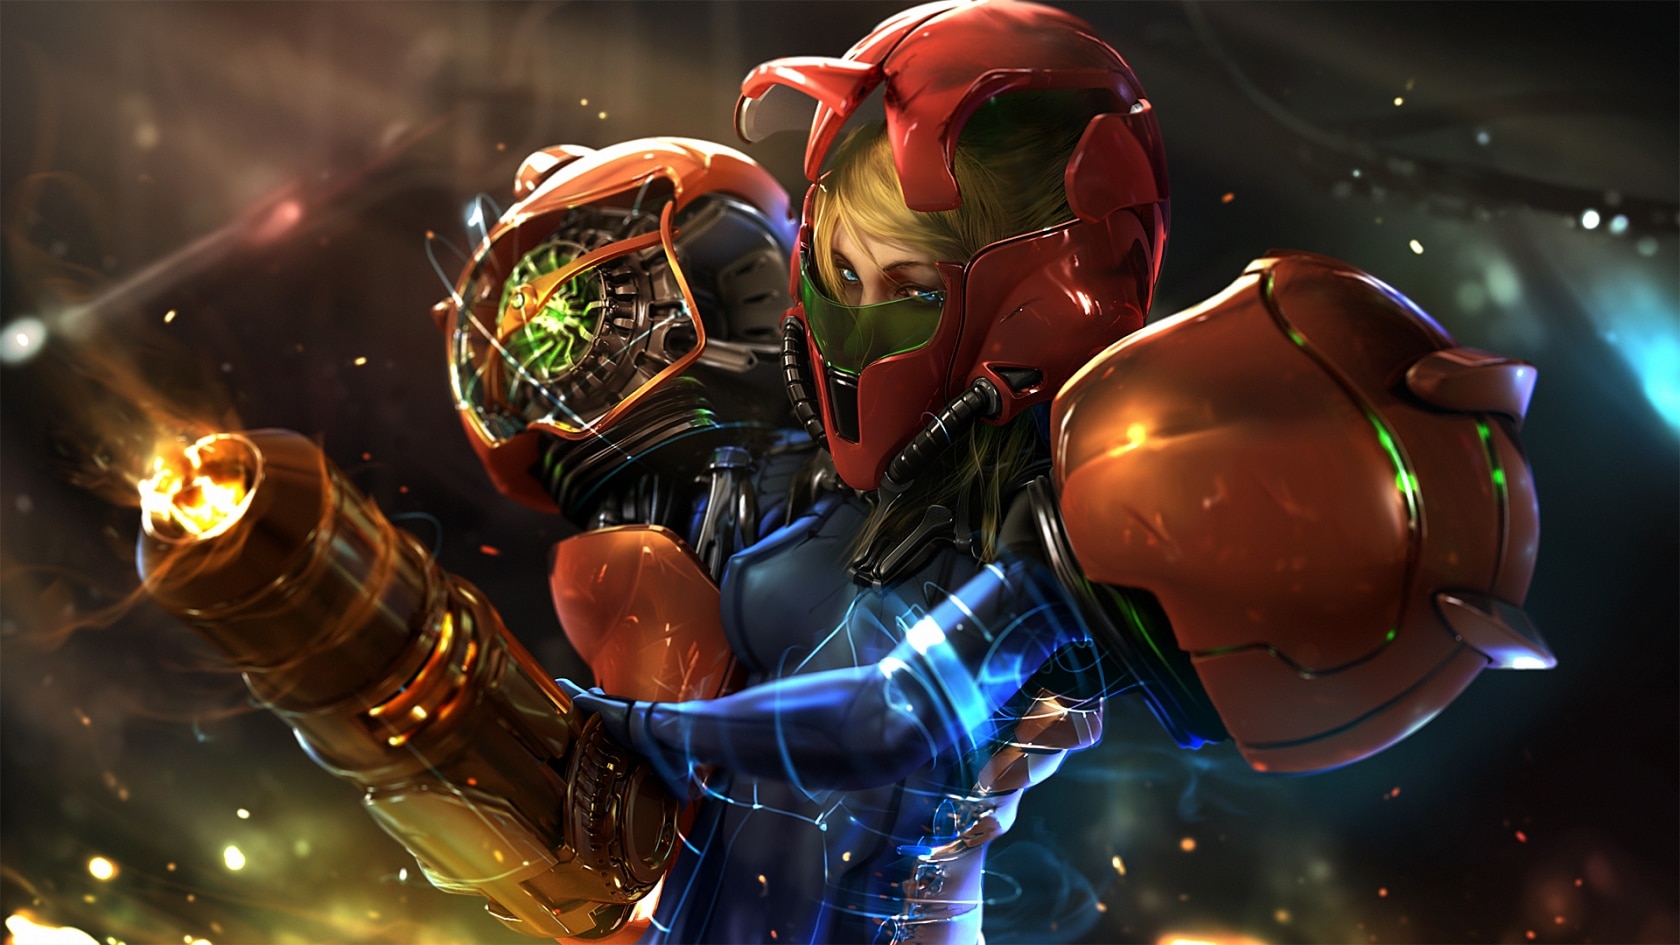 Samus Aran from Metroid can come to Fortnite